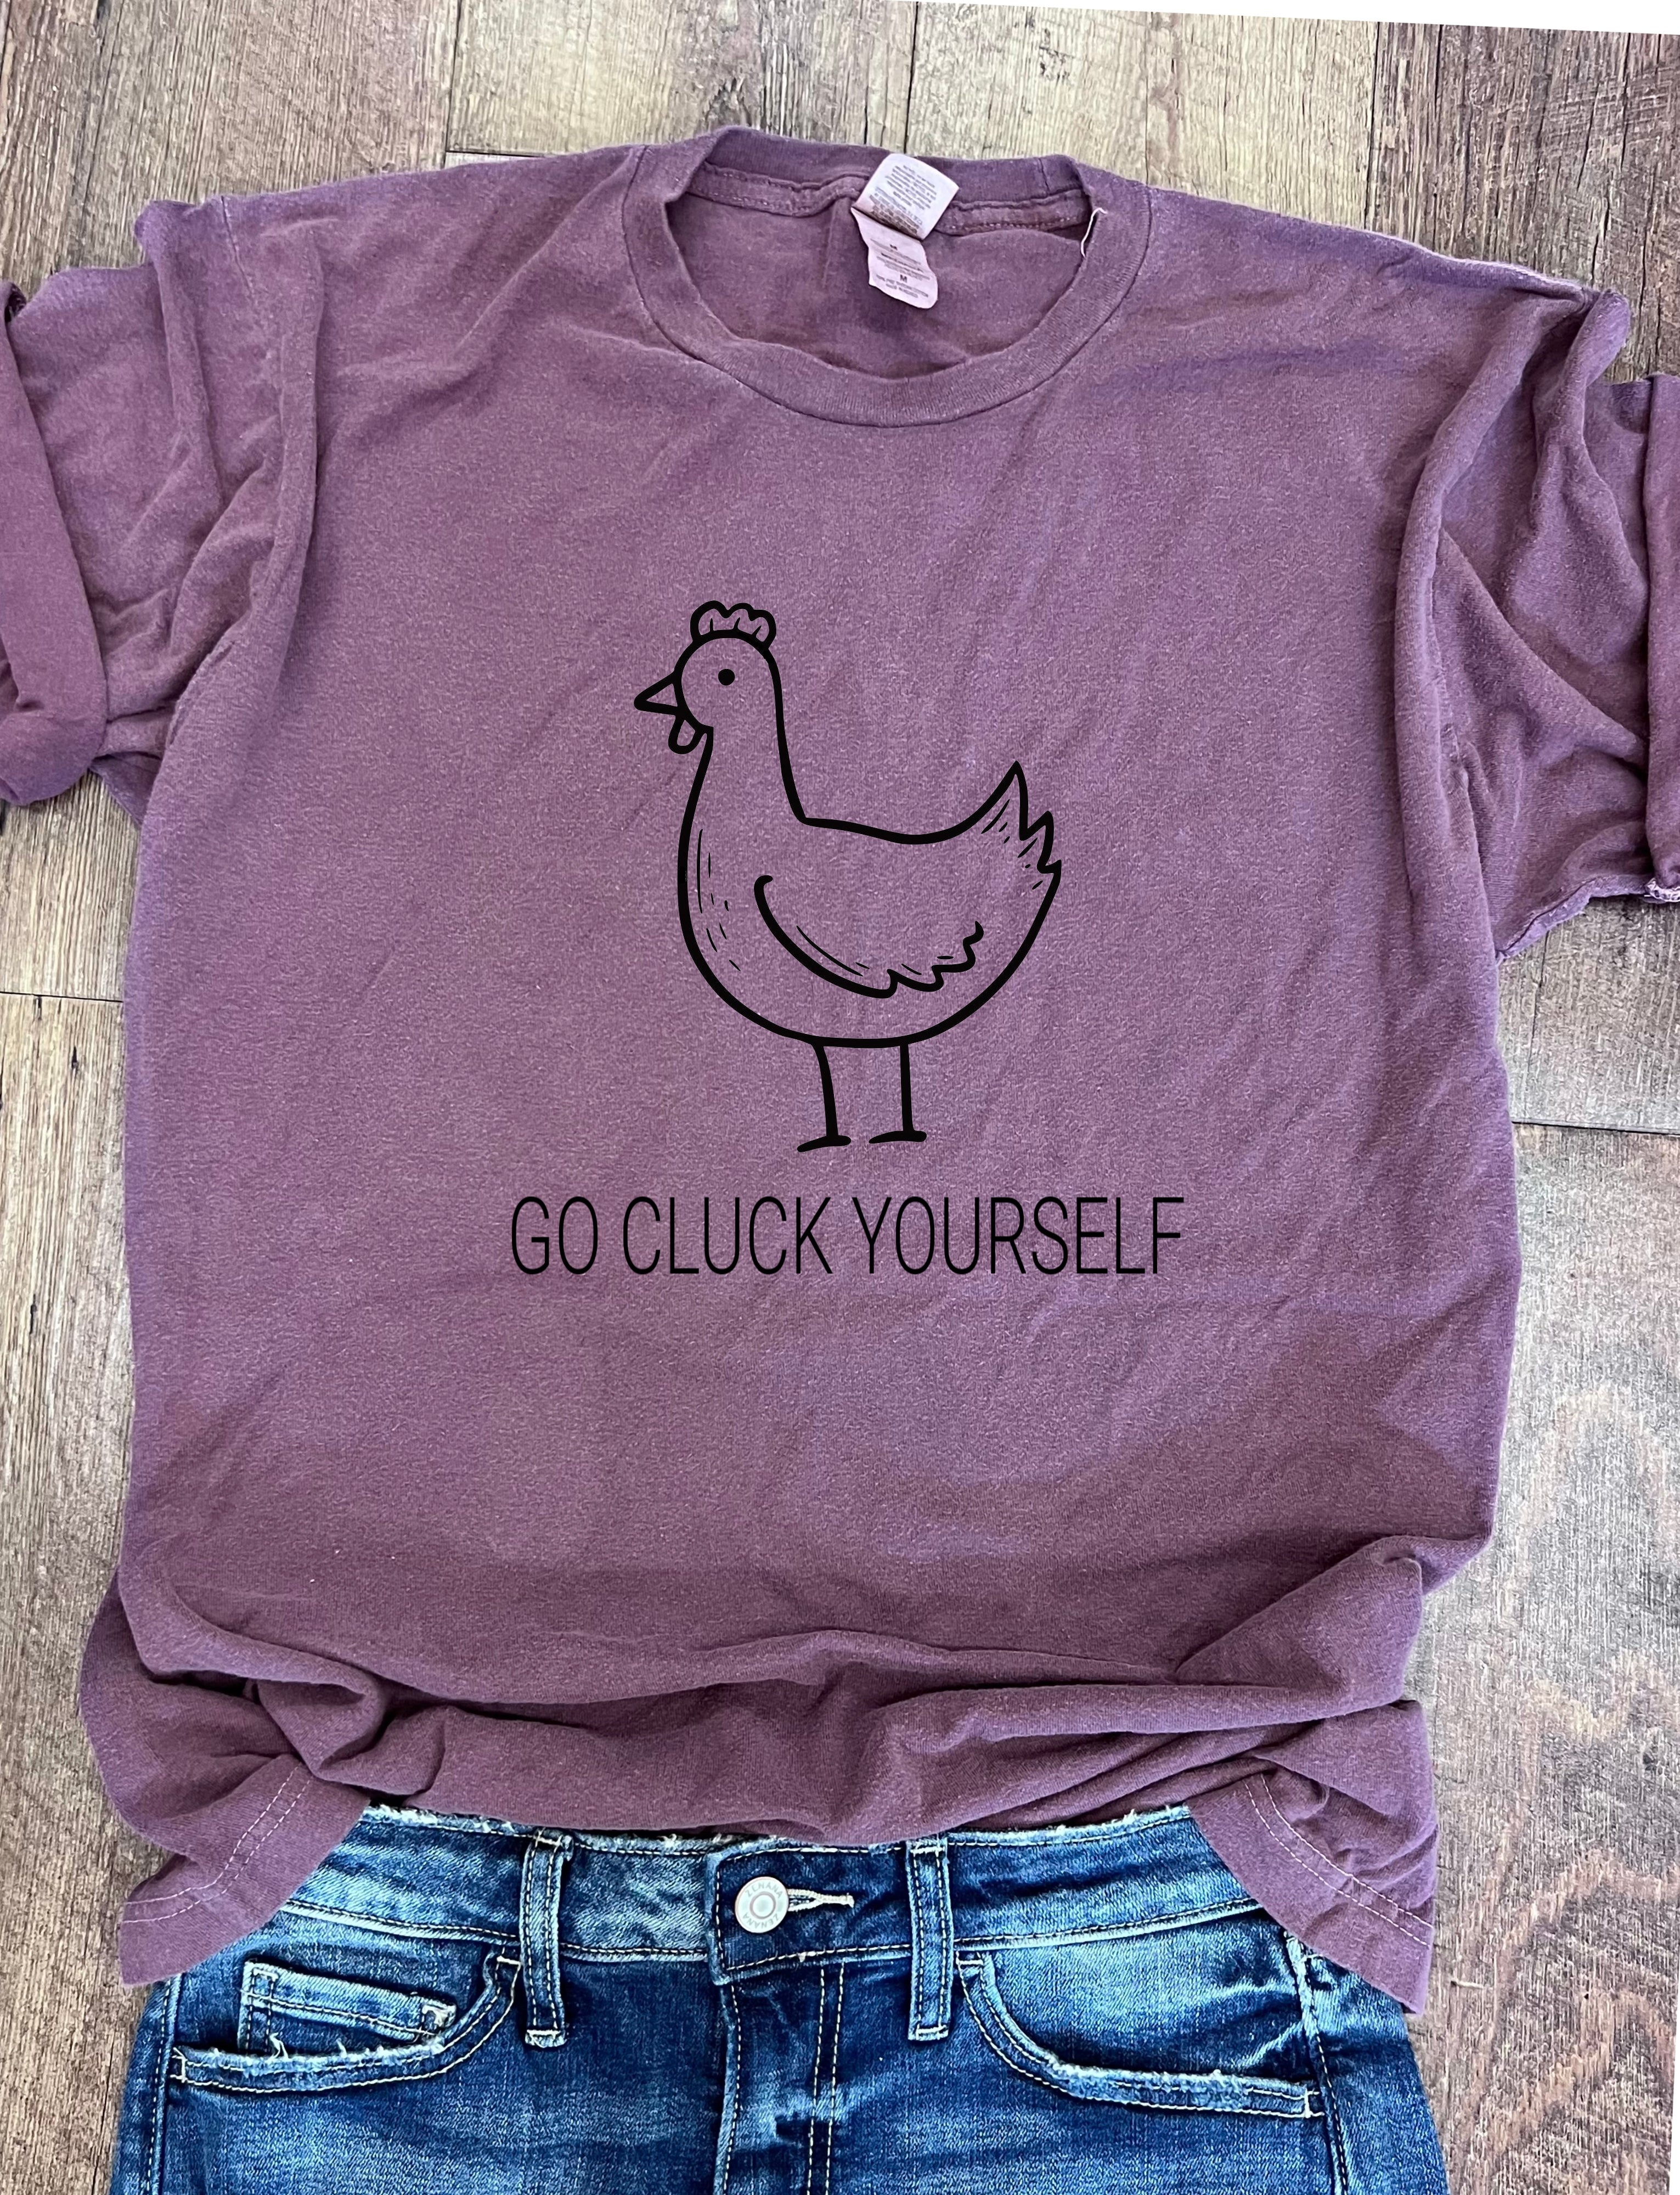 Go Cluck Yourself in Vintage Plum